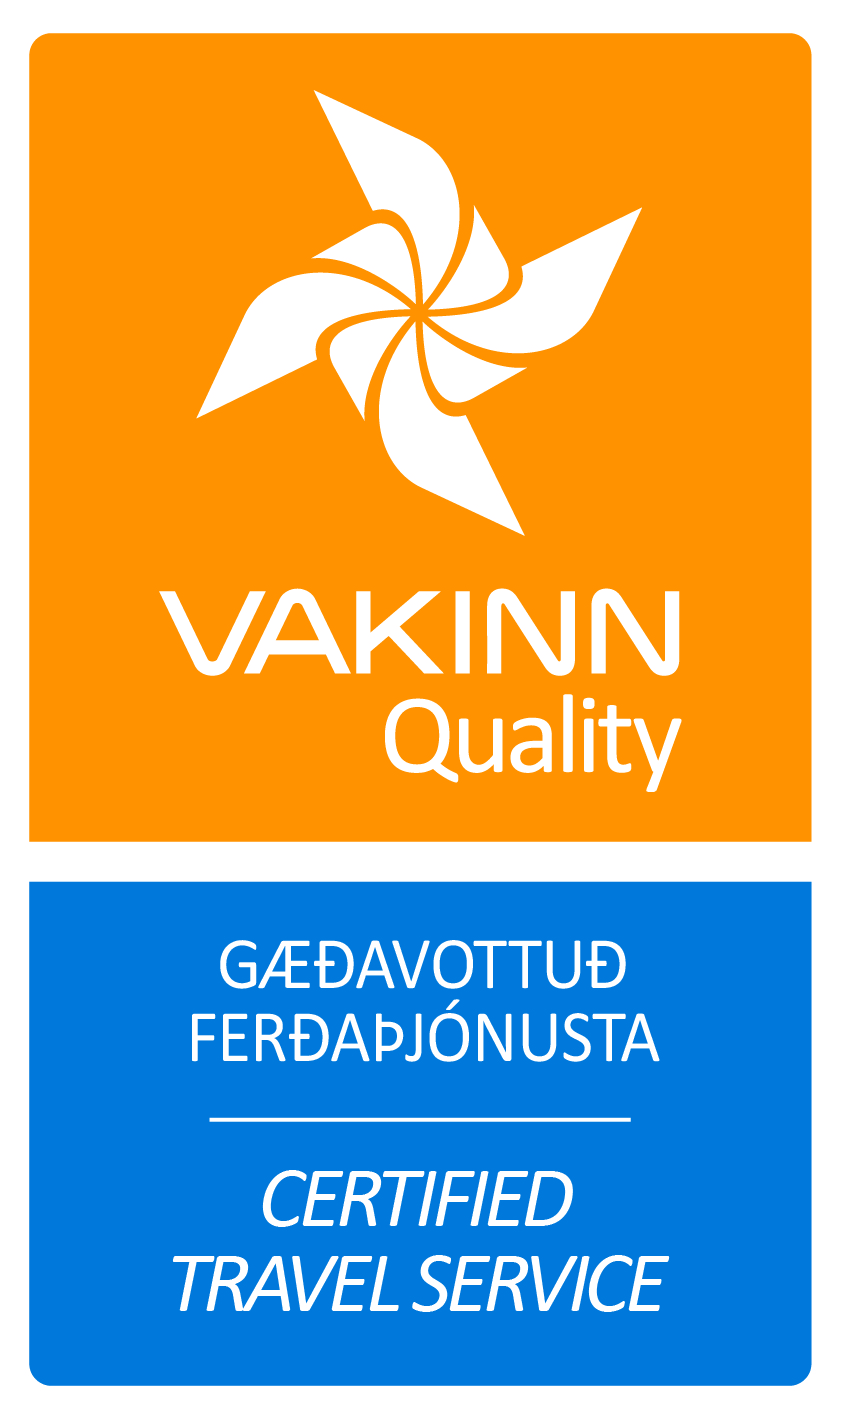 Certified travel service label